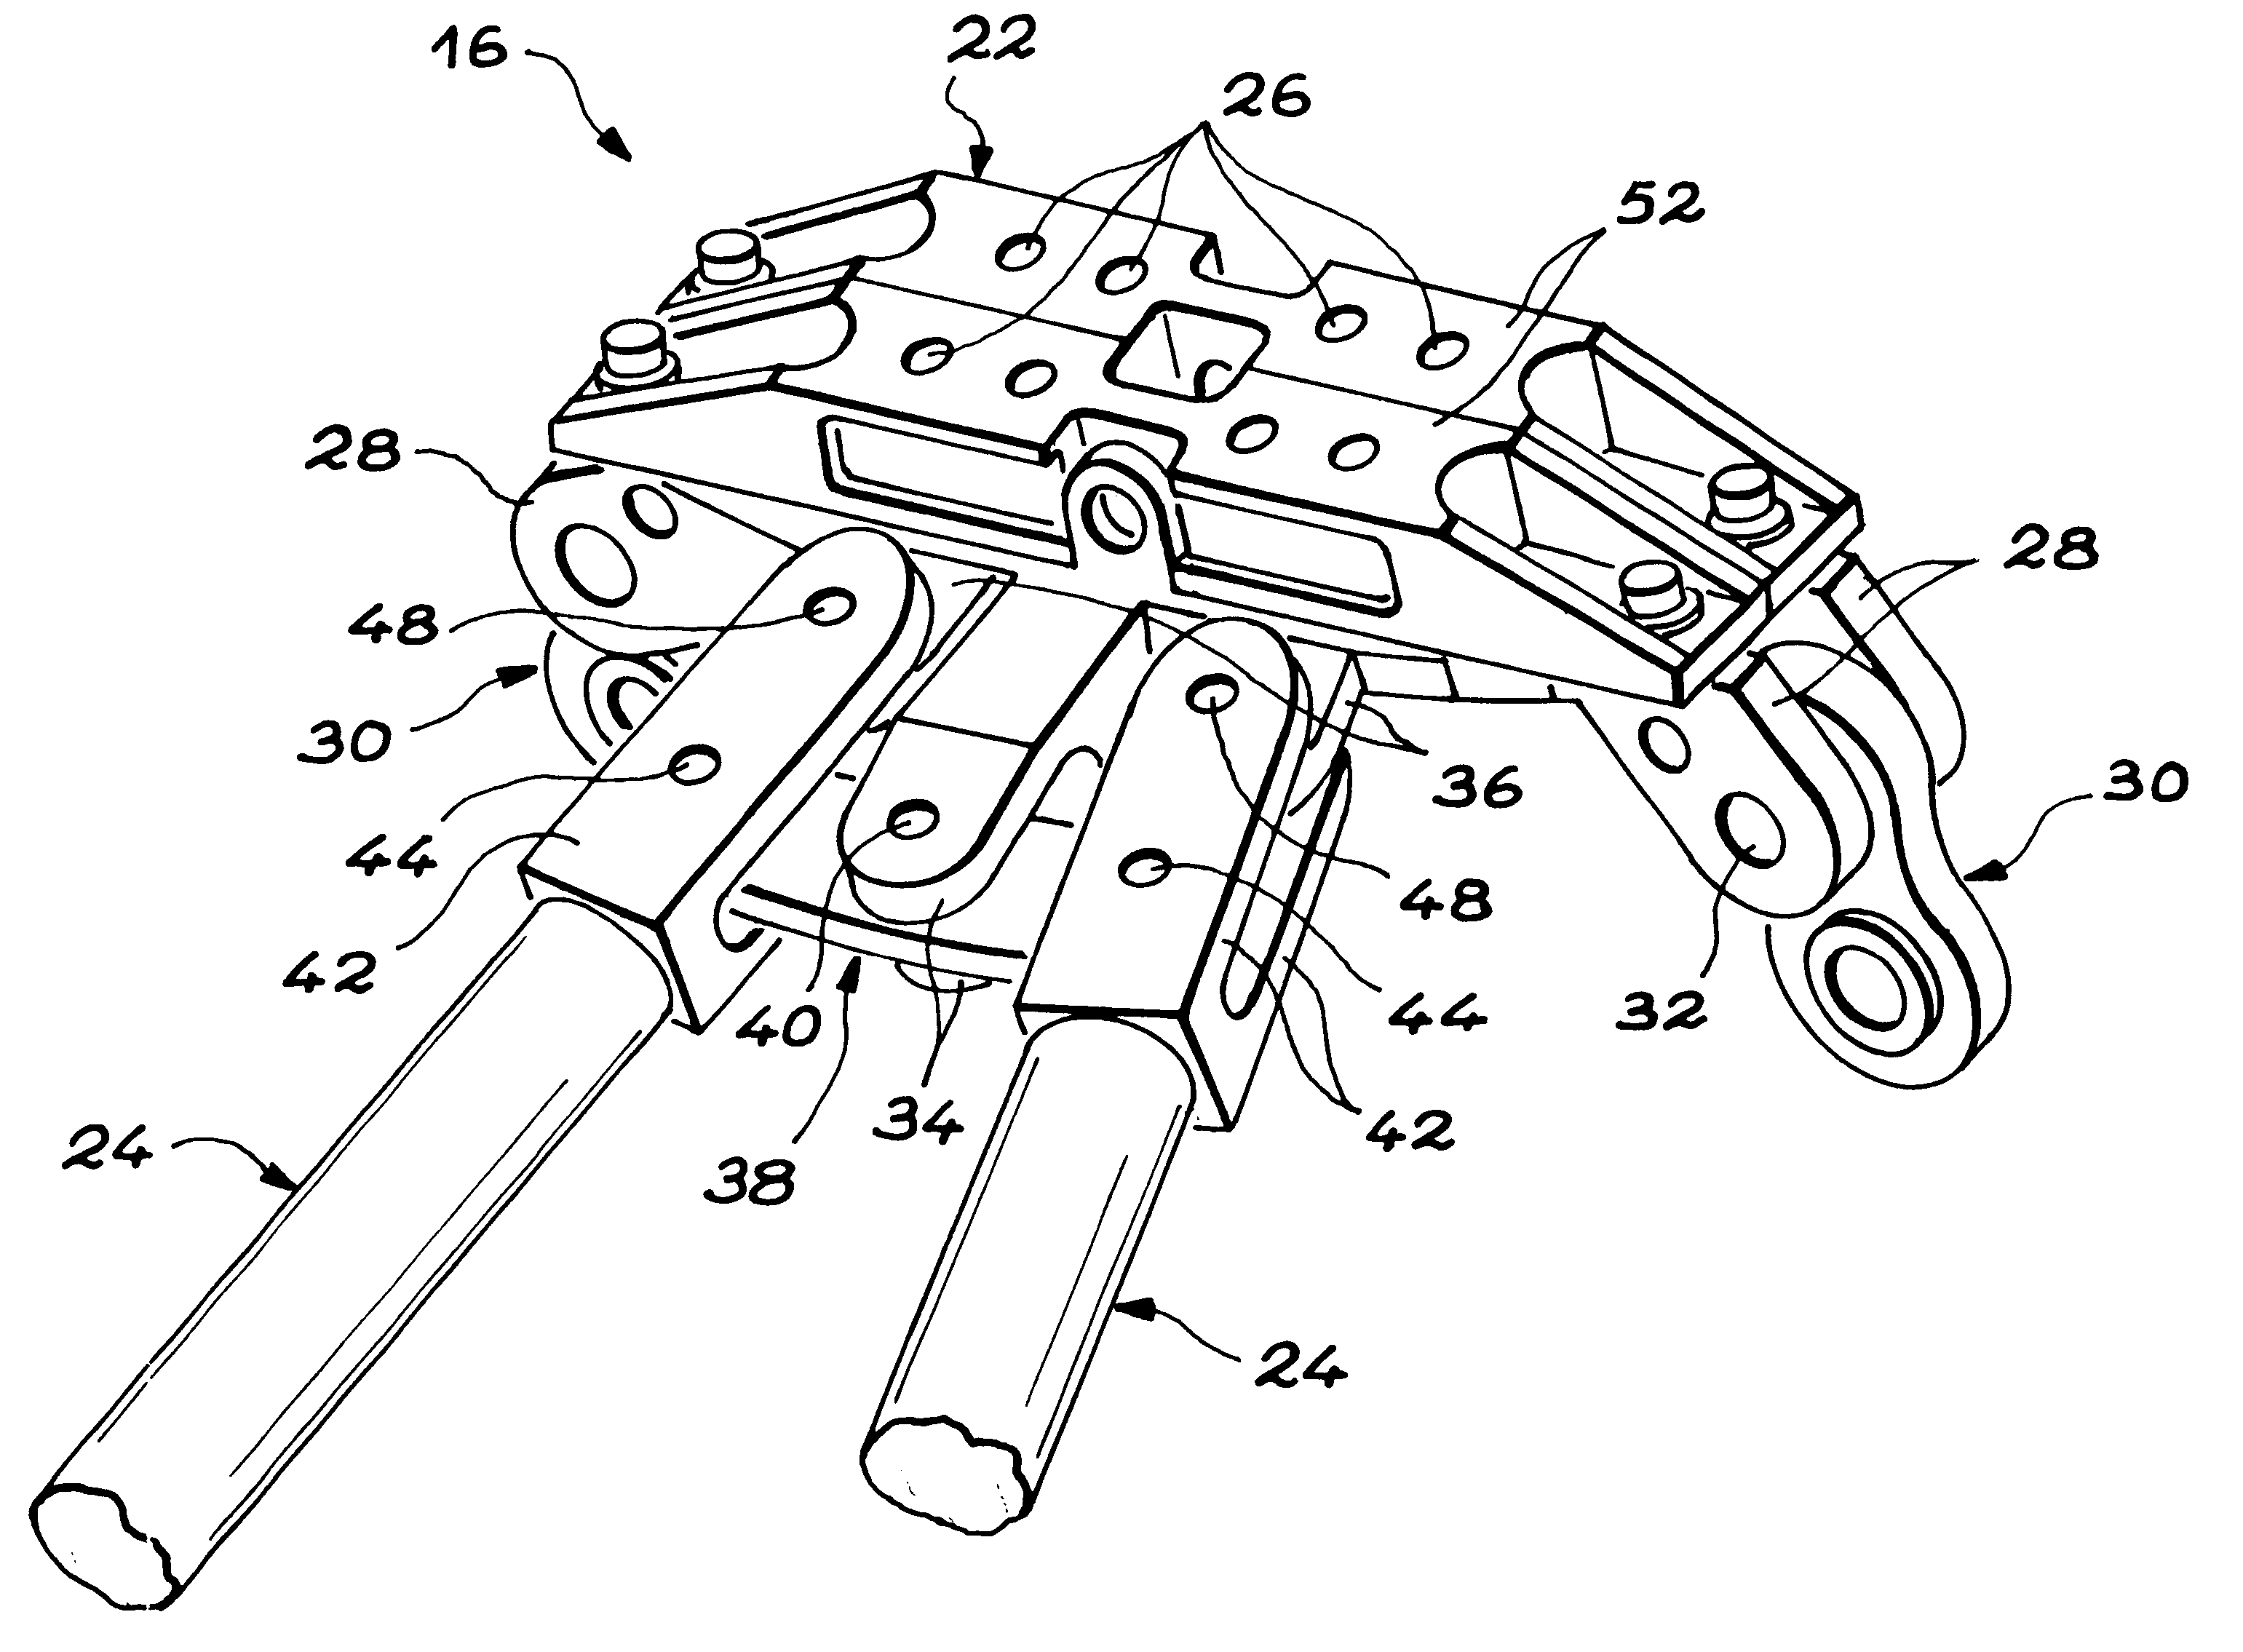 Device for aircraft thrust recovery capable of linking a turboshaft engine and an engine strut